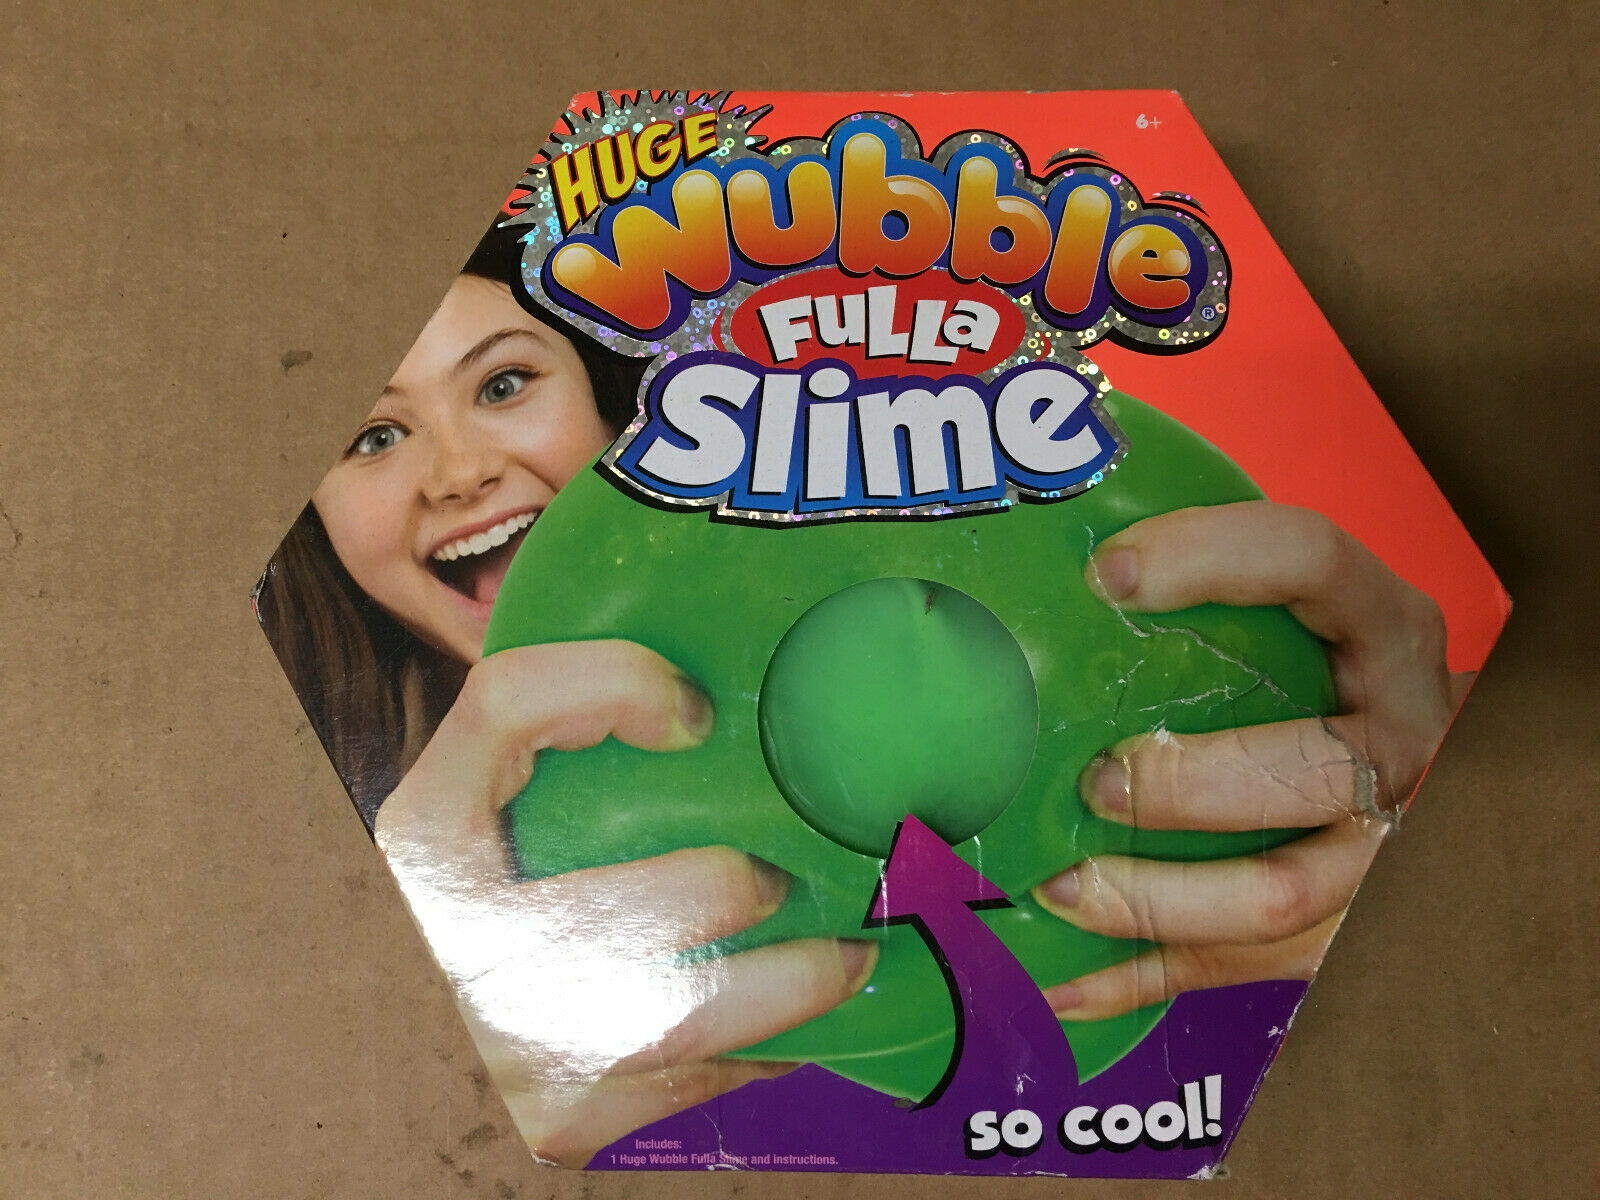 wubble bubble ball with helium